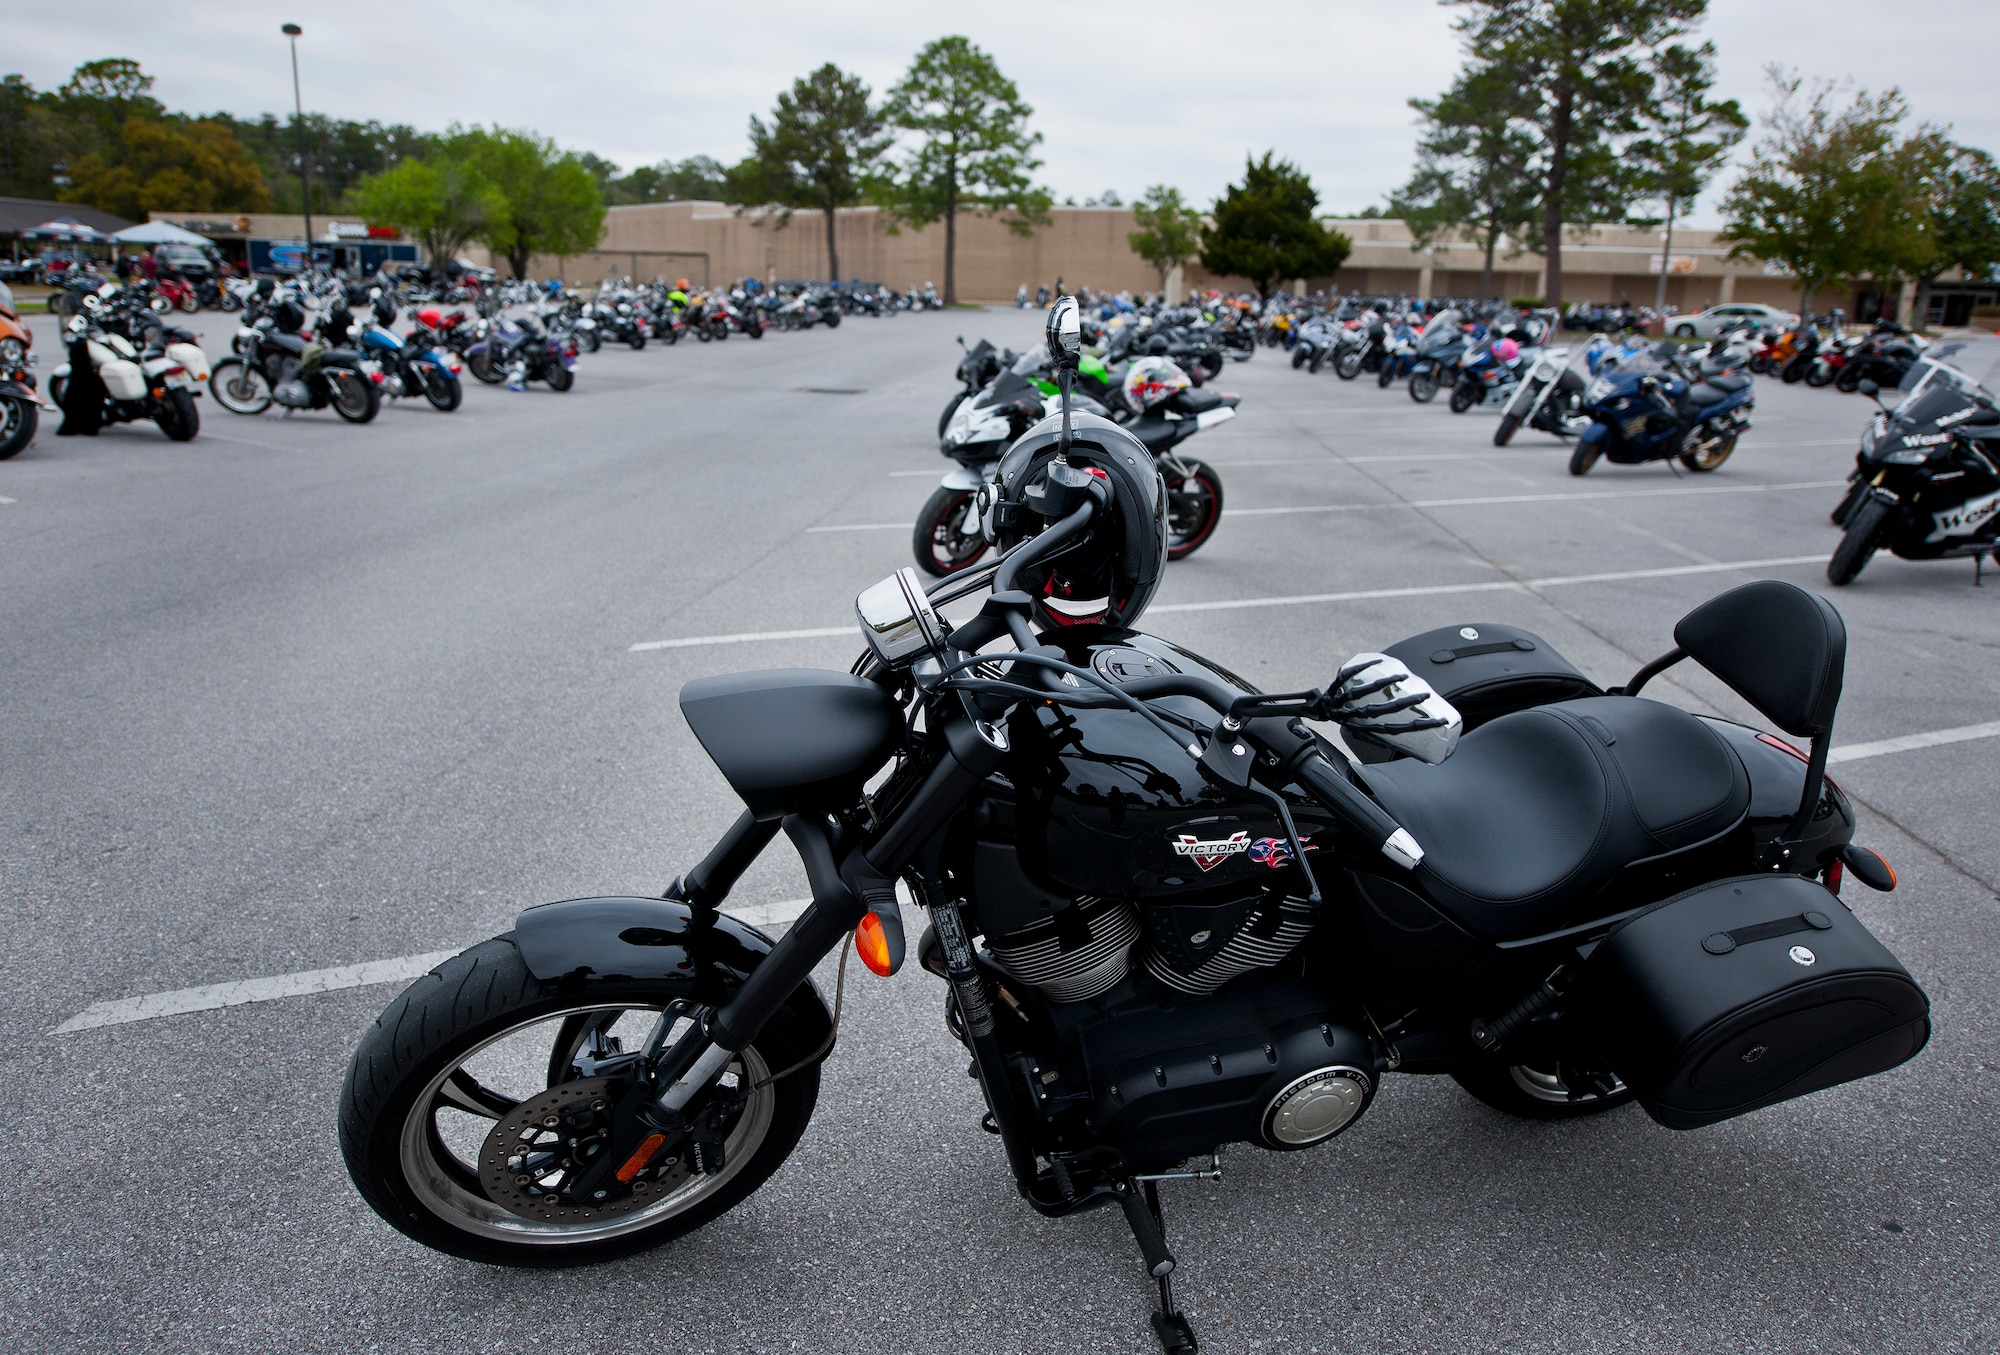 Motorcycles cover the Base Exchange parking lot during the base’s annual motorcycle safety rally April 15 at Eglin Air Force Base, Fla.  More than 500 civilian and military riders rode in for the joint 53rd Wing/96th Test Wing event. (U.S. Air Force photo/Samuel King Jr.)